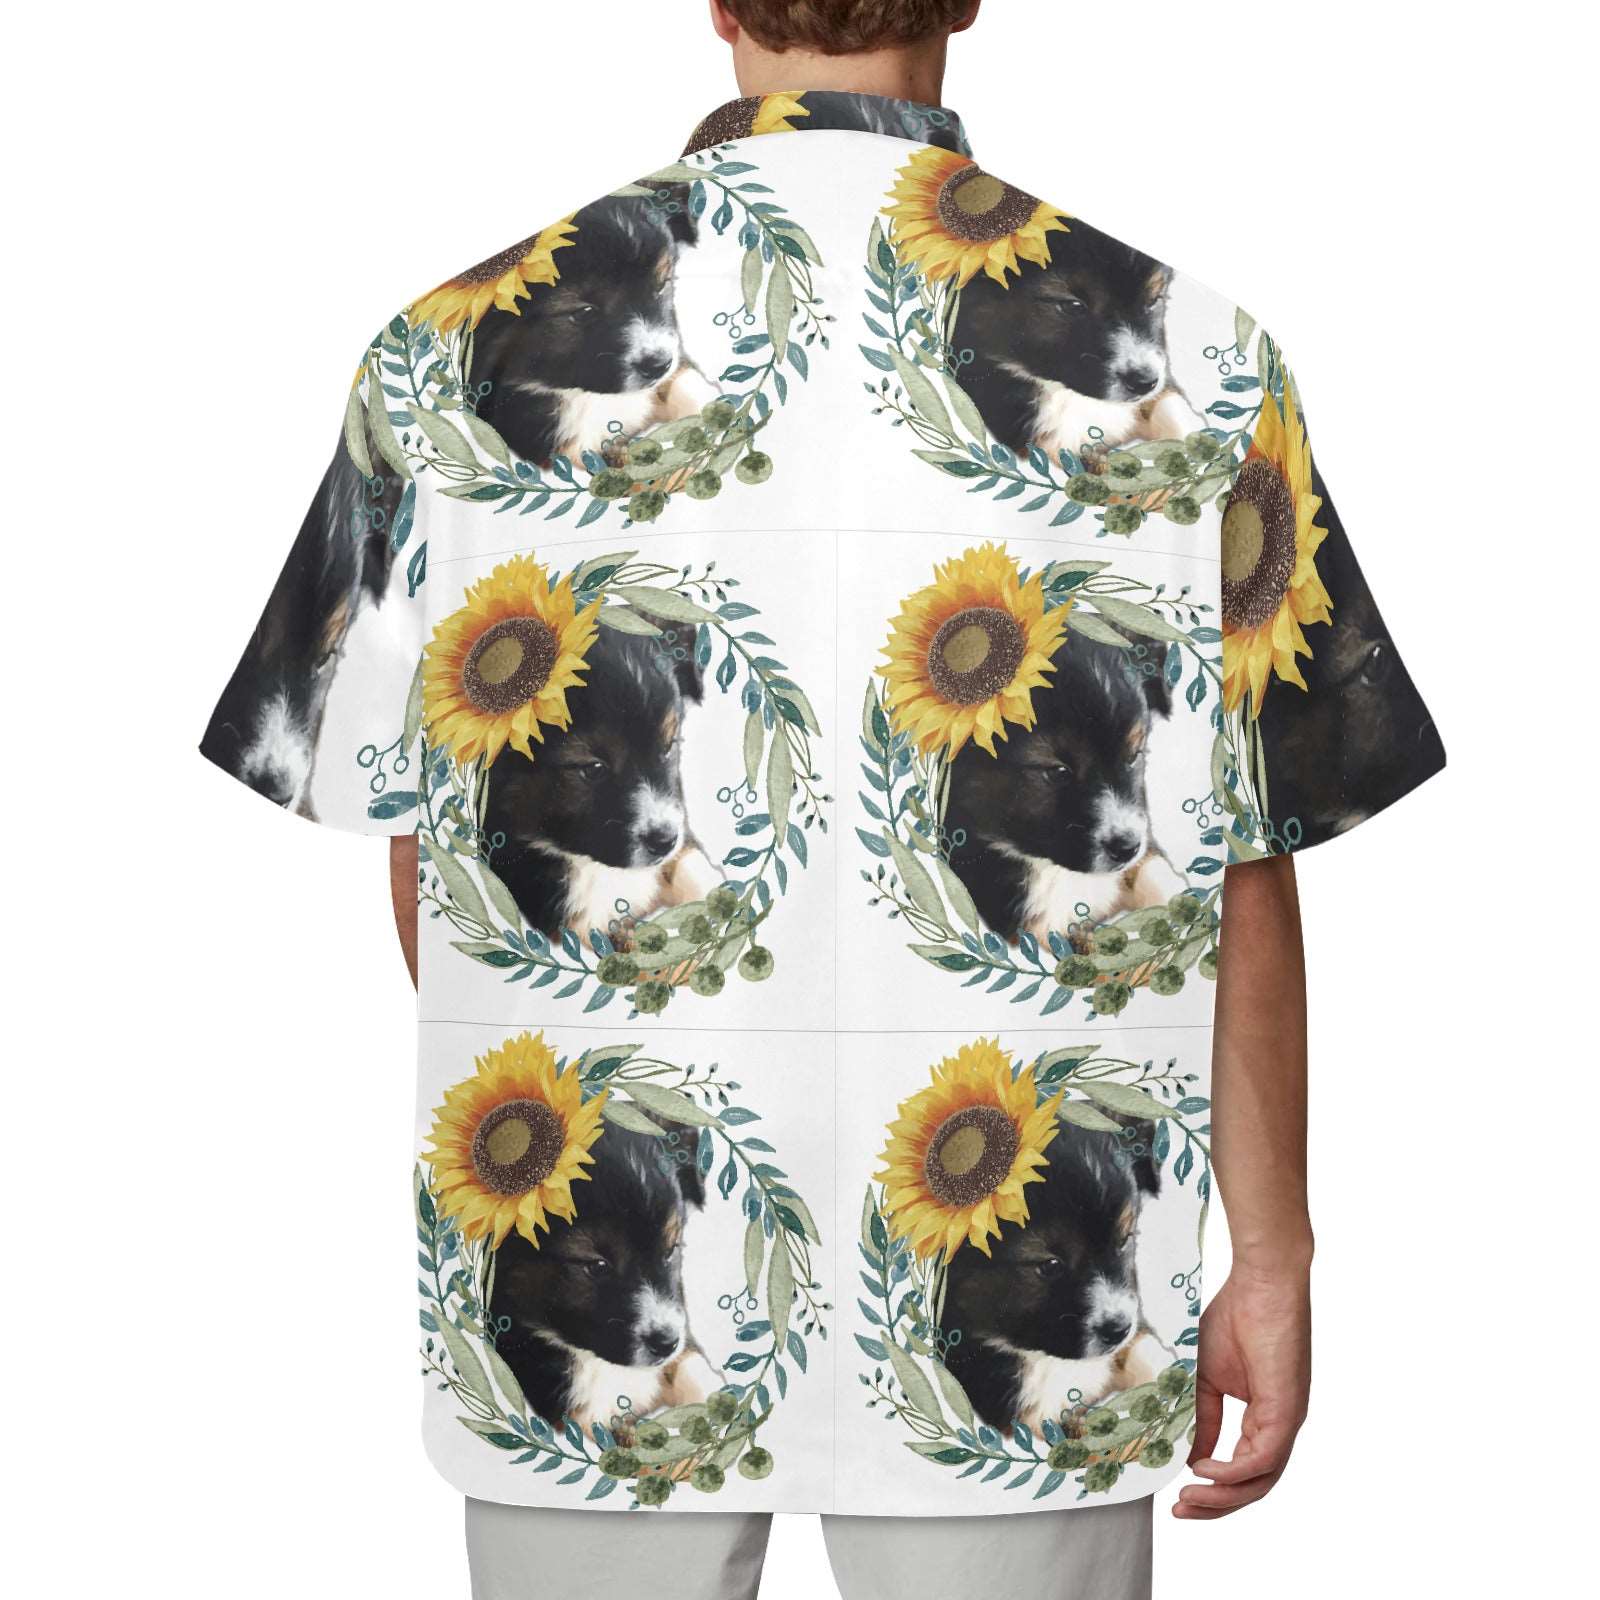 Black Puppy with Sunflowers Design Unisex Grooming Jacket with Zipper up to 2XL